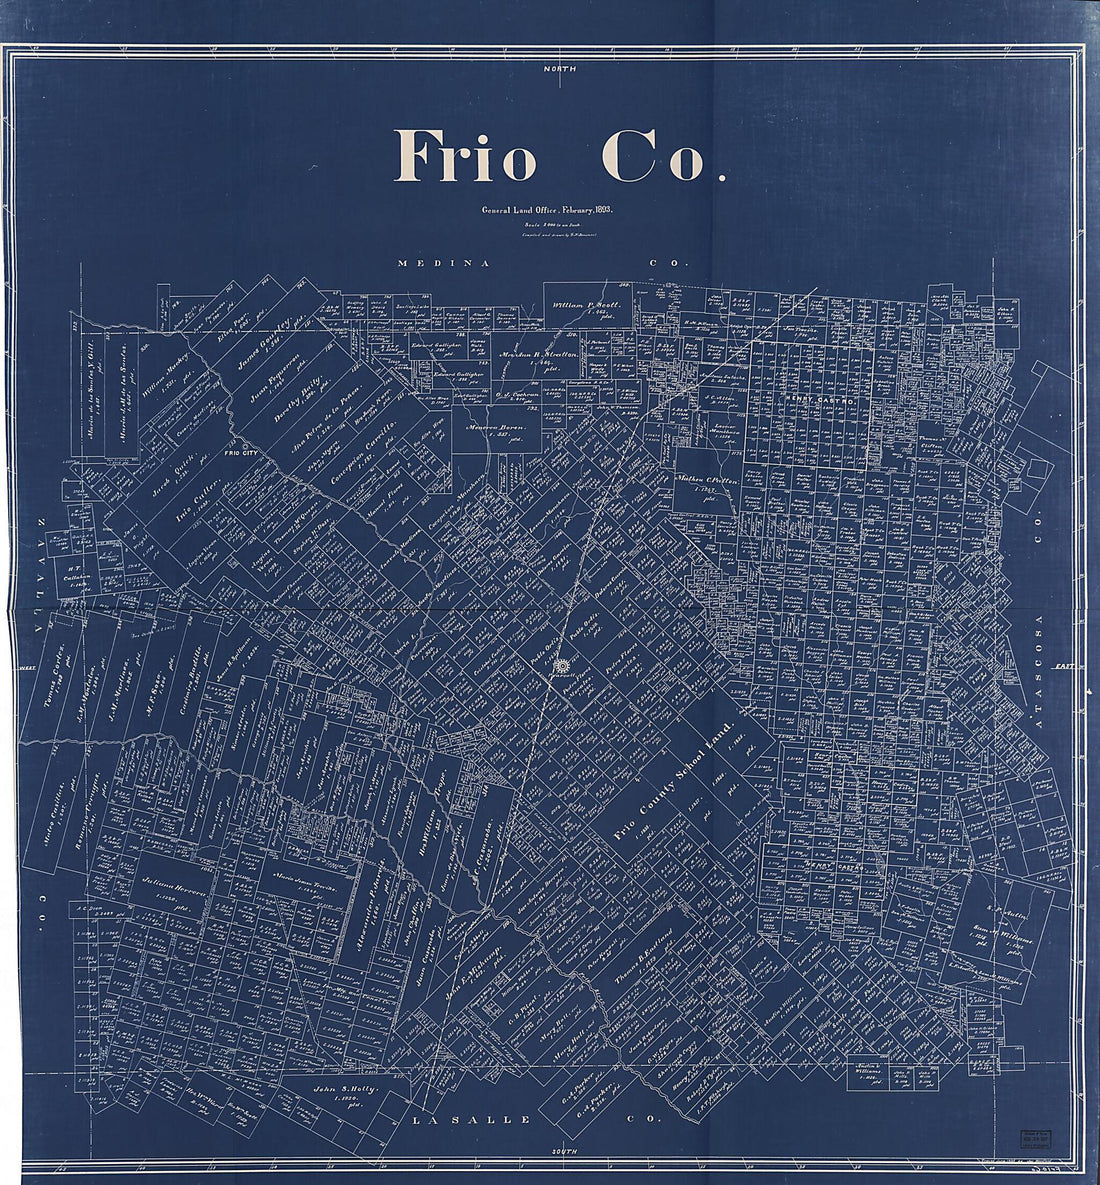 This old map of Frio County (Frio County, Texas) from 1893 was created by G. N. Beaumont in 1893